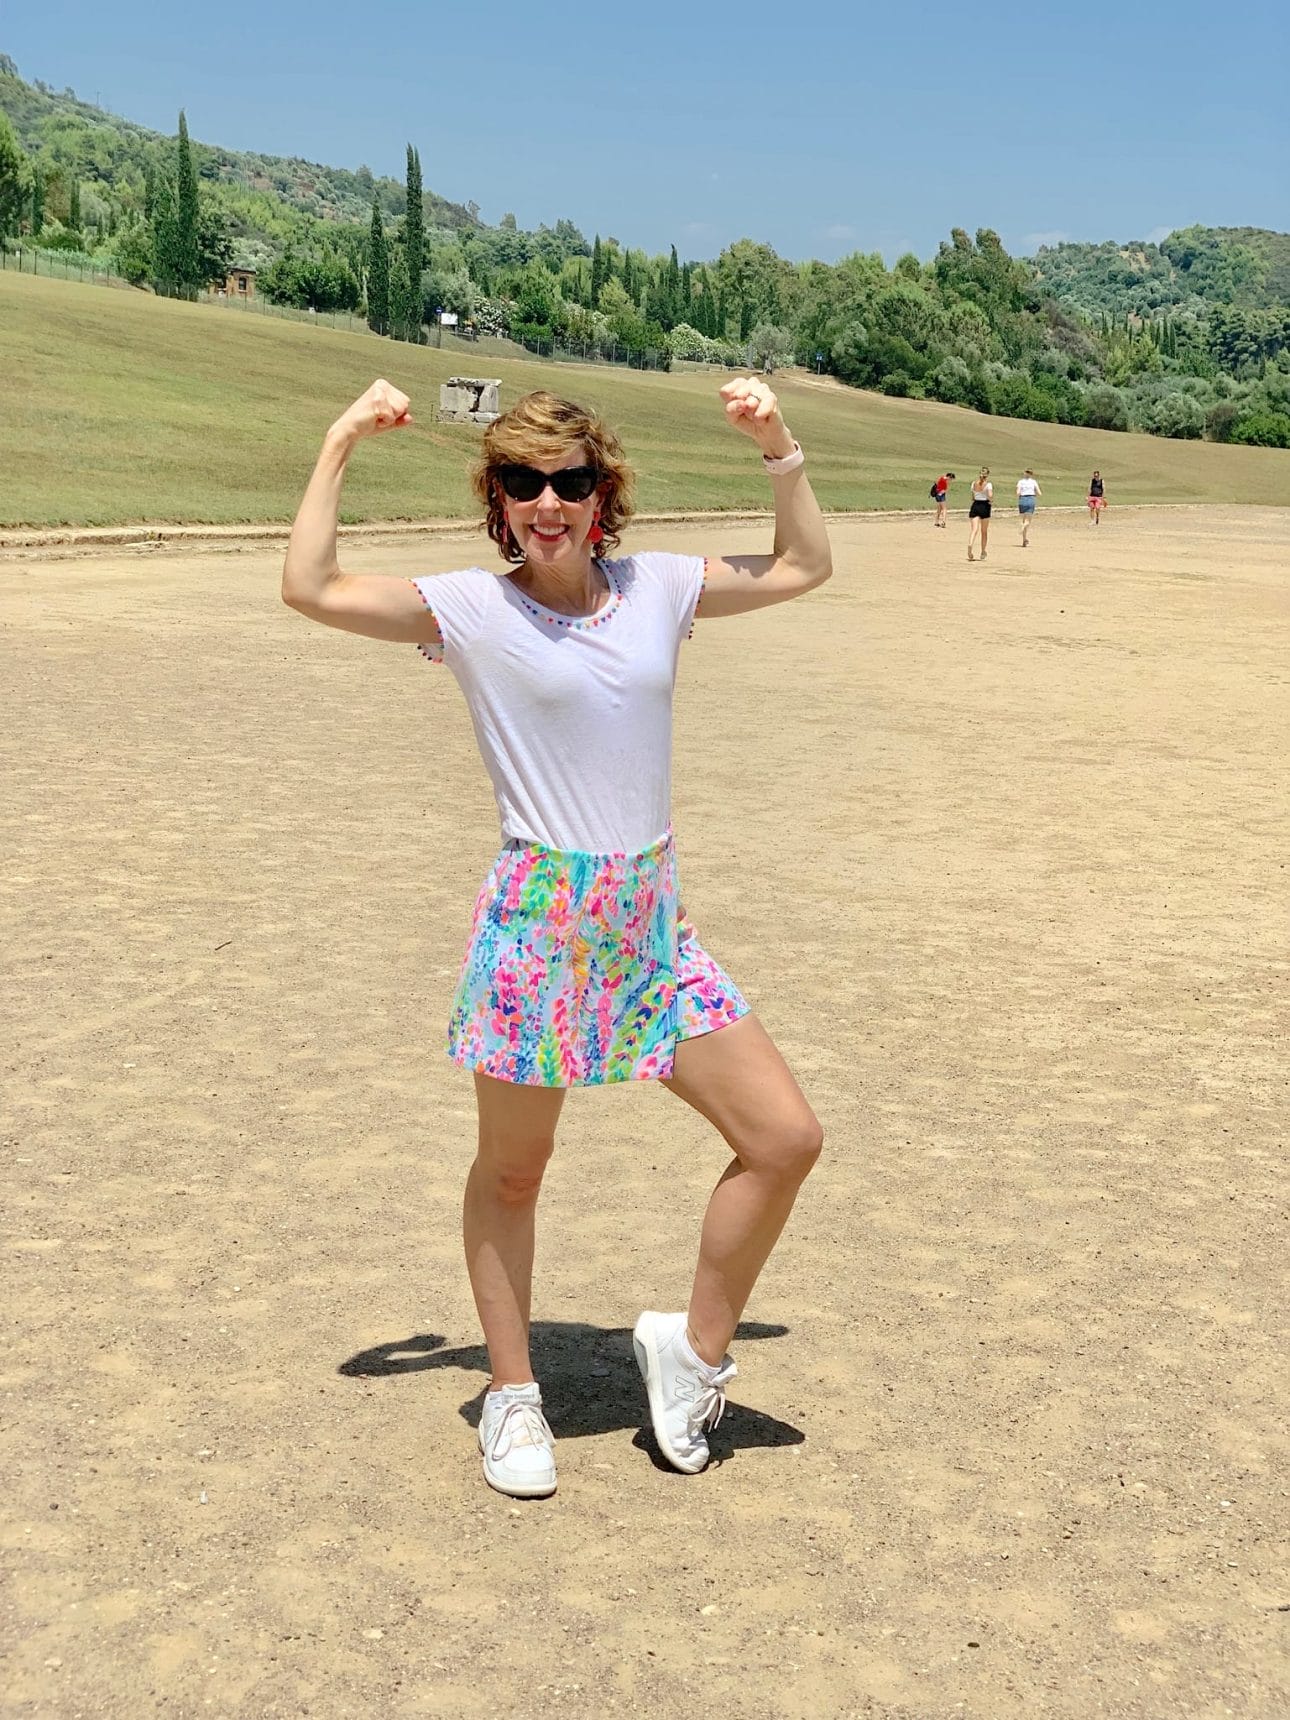 women flexing biceps on a field at the site of the first olympics in olympia greece